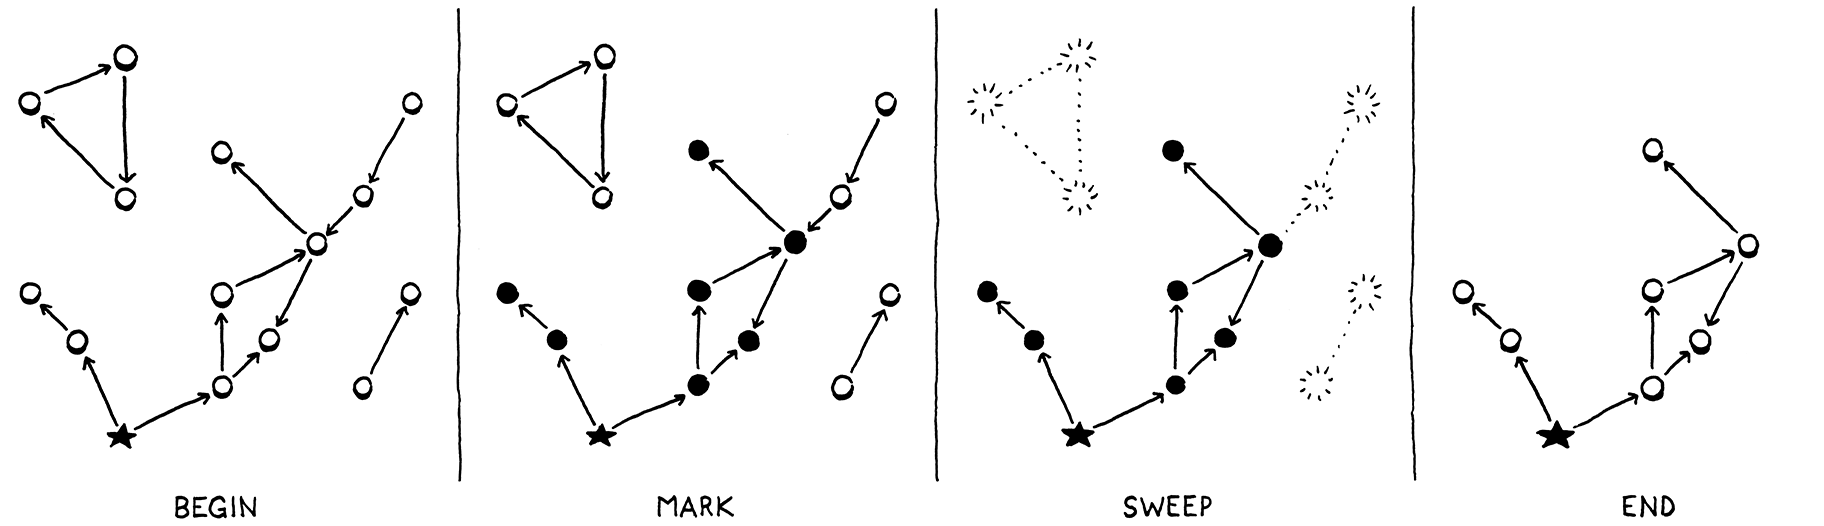 mark-sweep.png